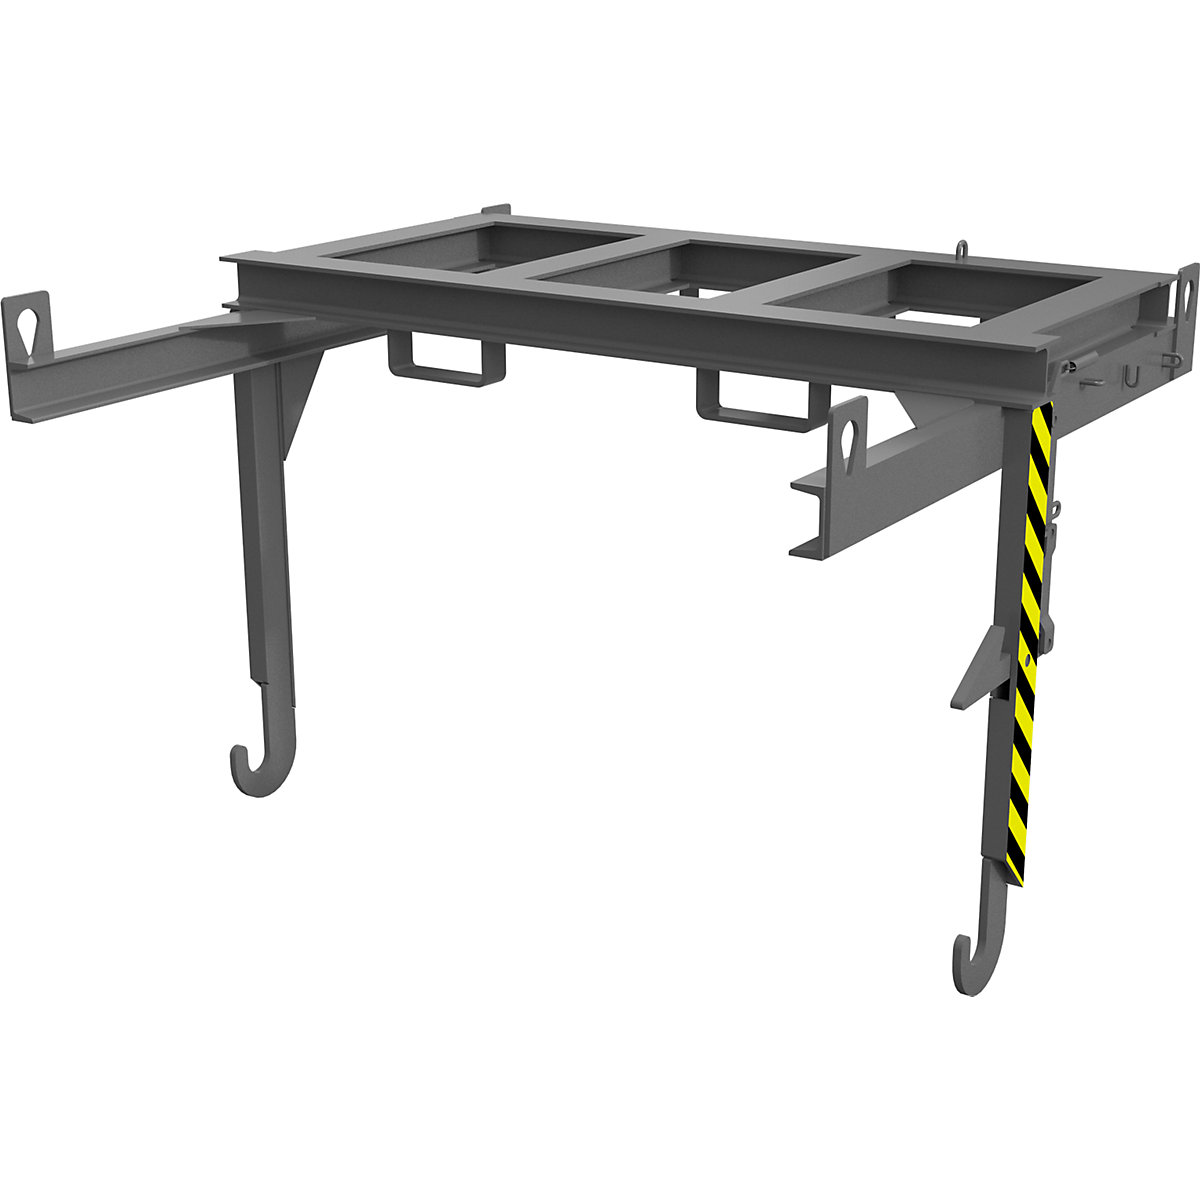 Forklift support bar for tilting skips and stacking containers – eurokraft pro, for cranes, max. load 2000 kg, for container size 1.5 m³